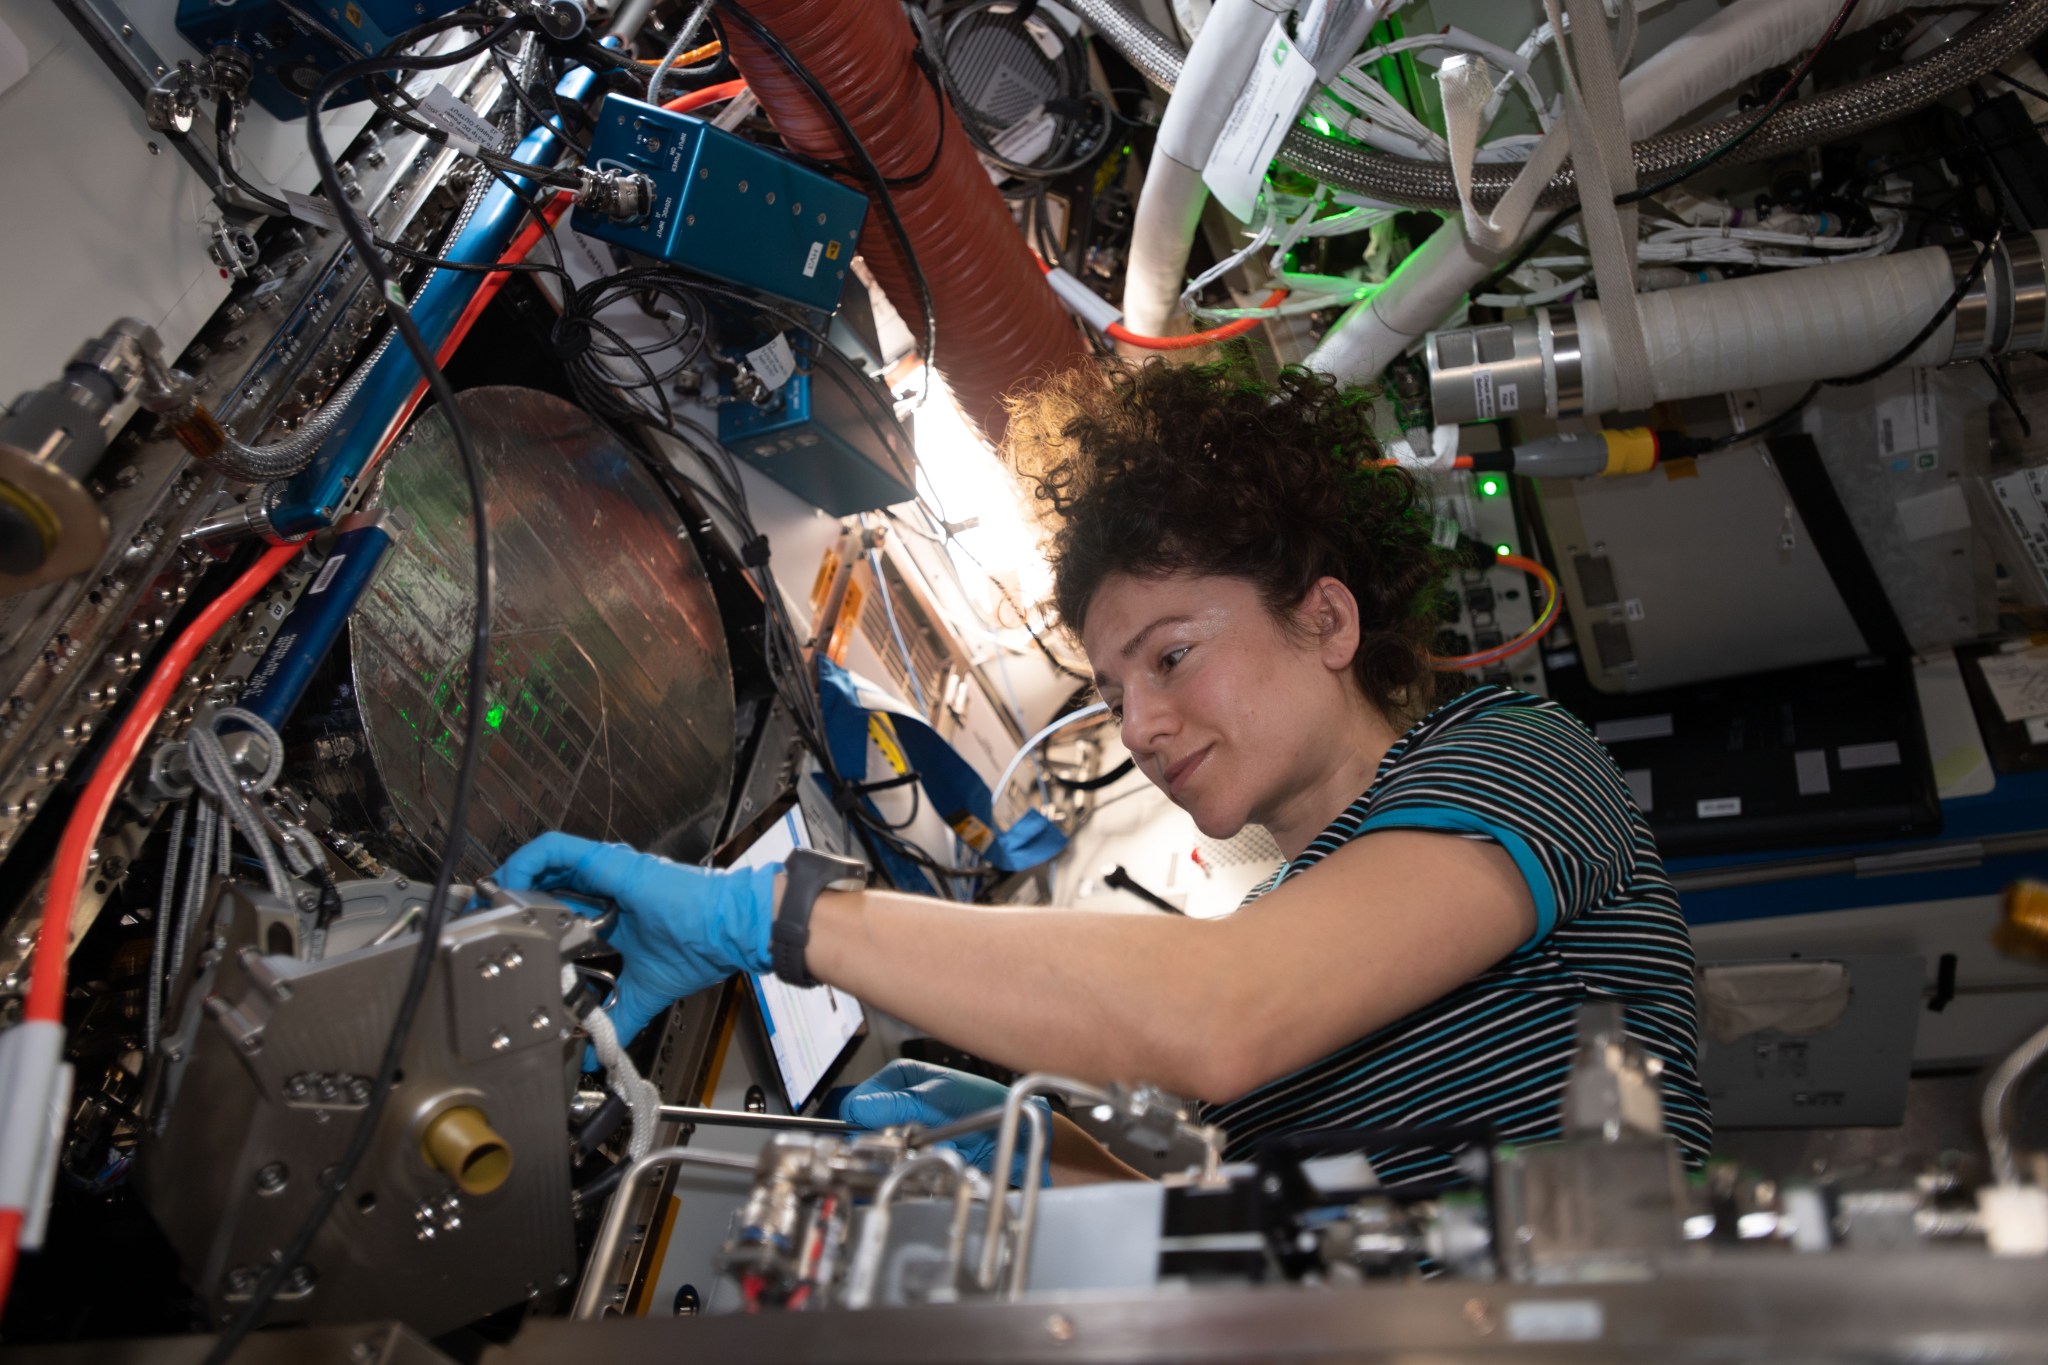 NASA astronaut Jessica Meir works on works on orbital plumbing tasks inside the Tranquility module's Life Support Rack